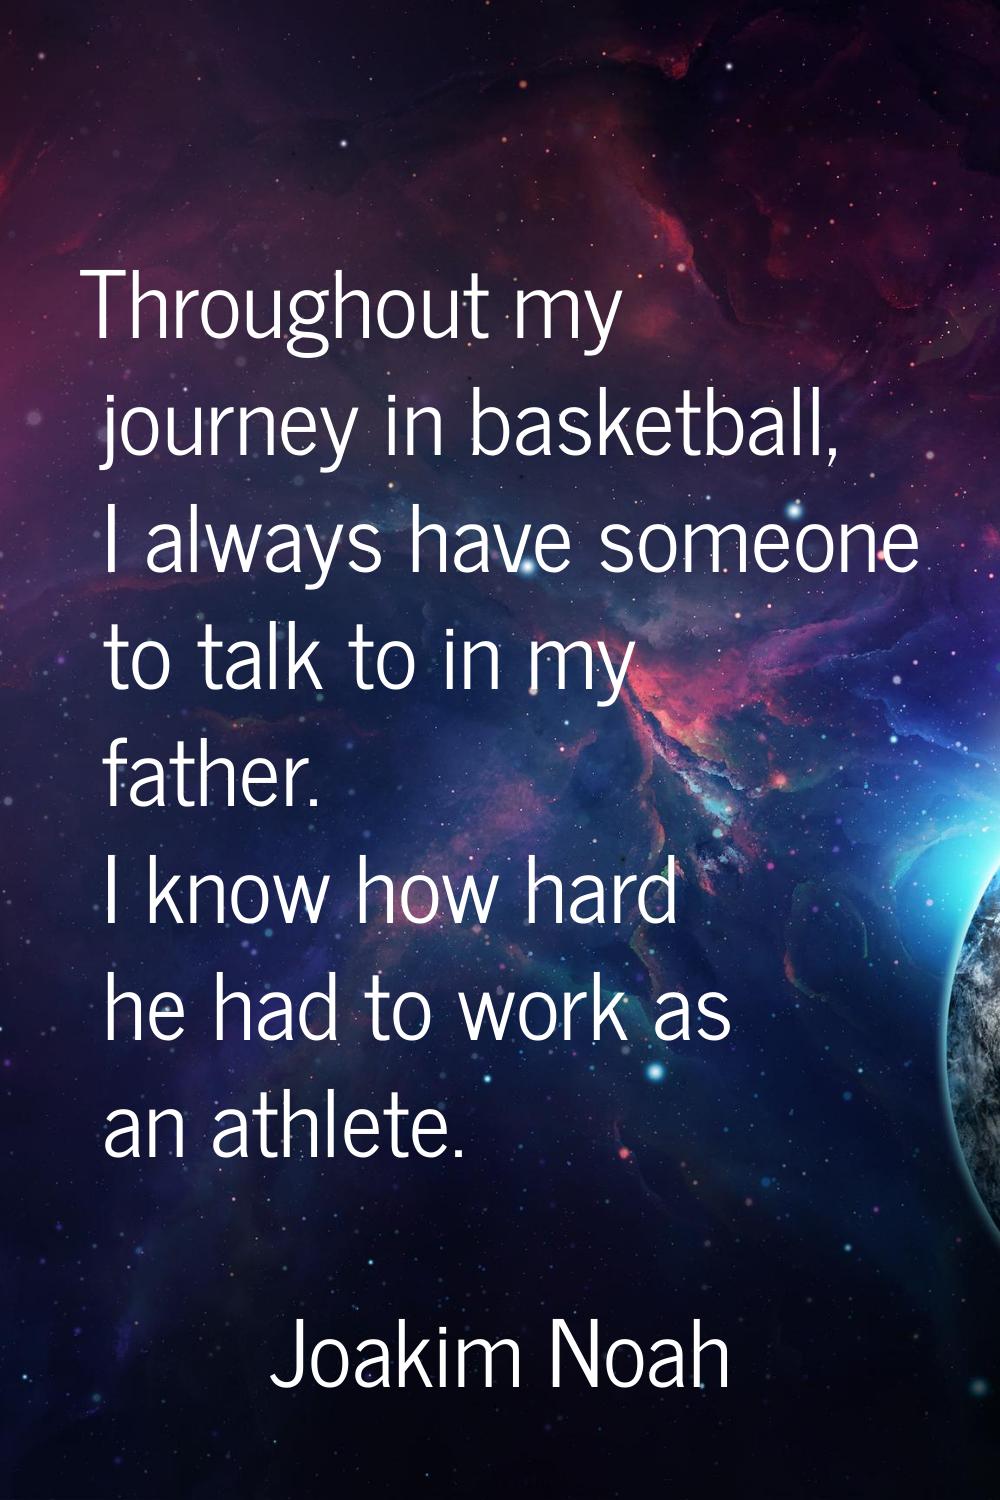 Throughout my journey in basketball, I always have someone to talk to in my father. I know how hard